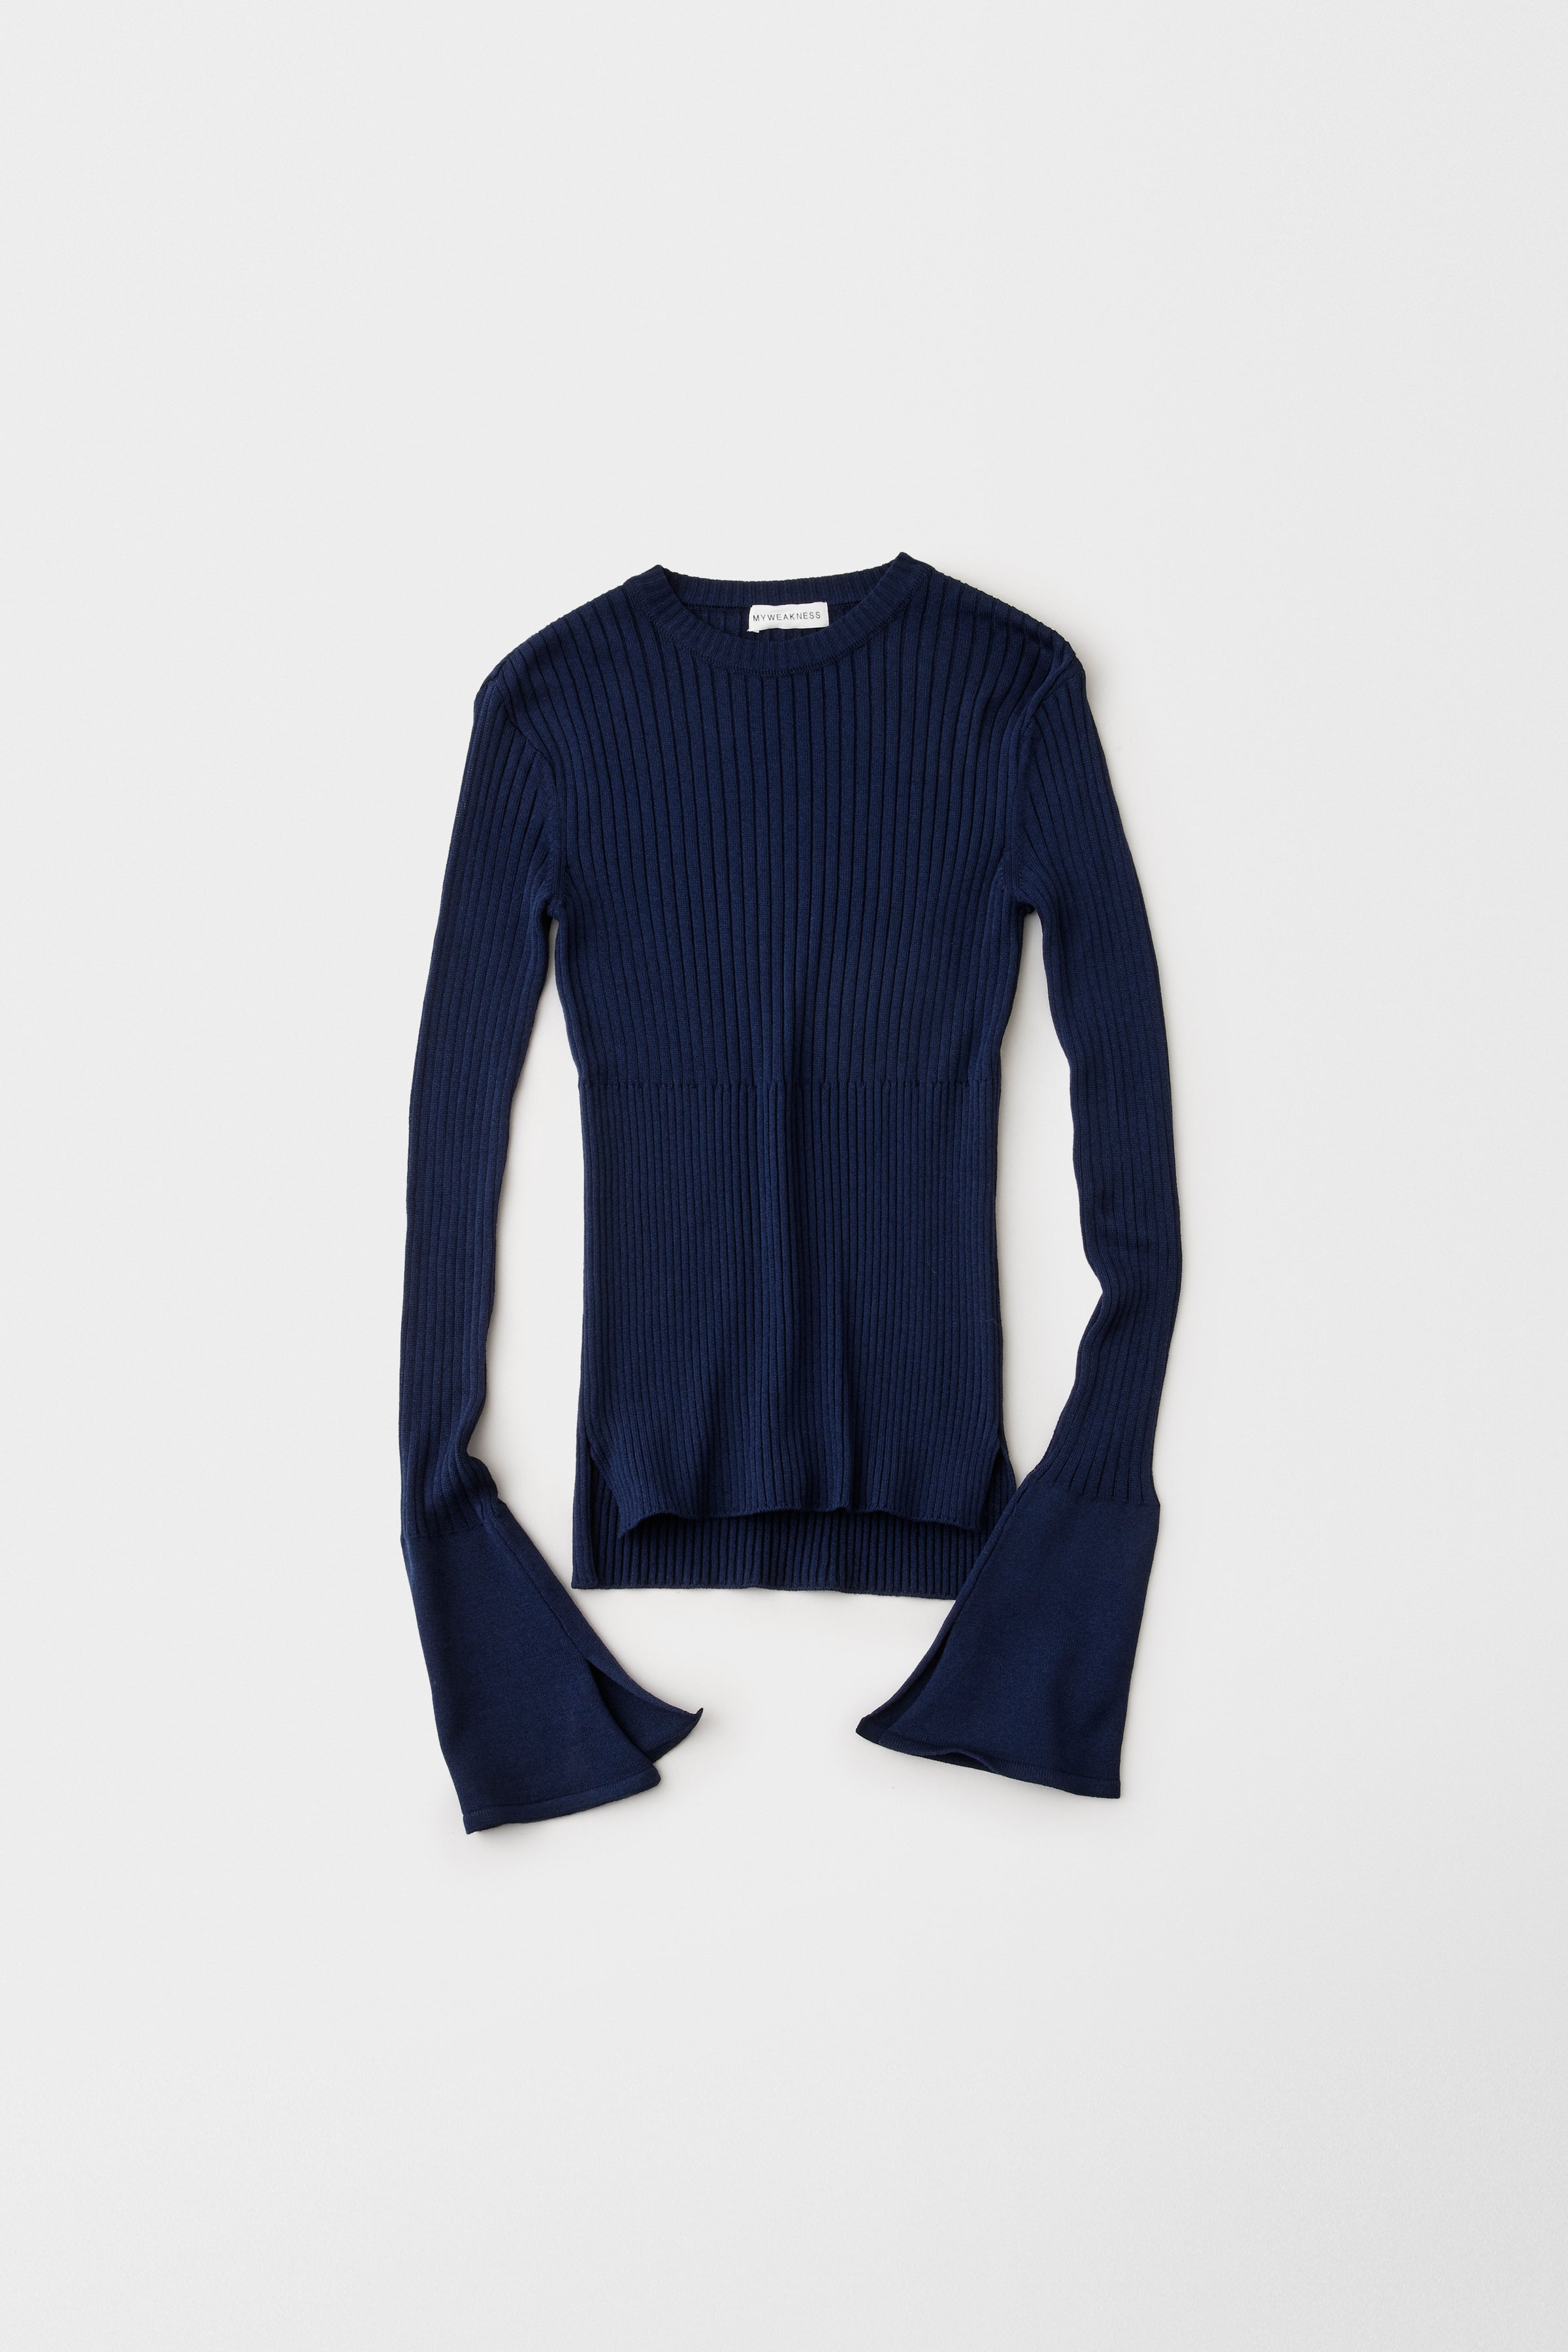 Lily Knit | MY WEAKNESS Official Site